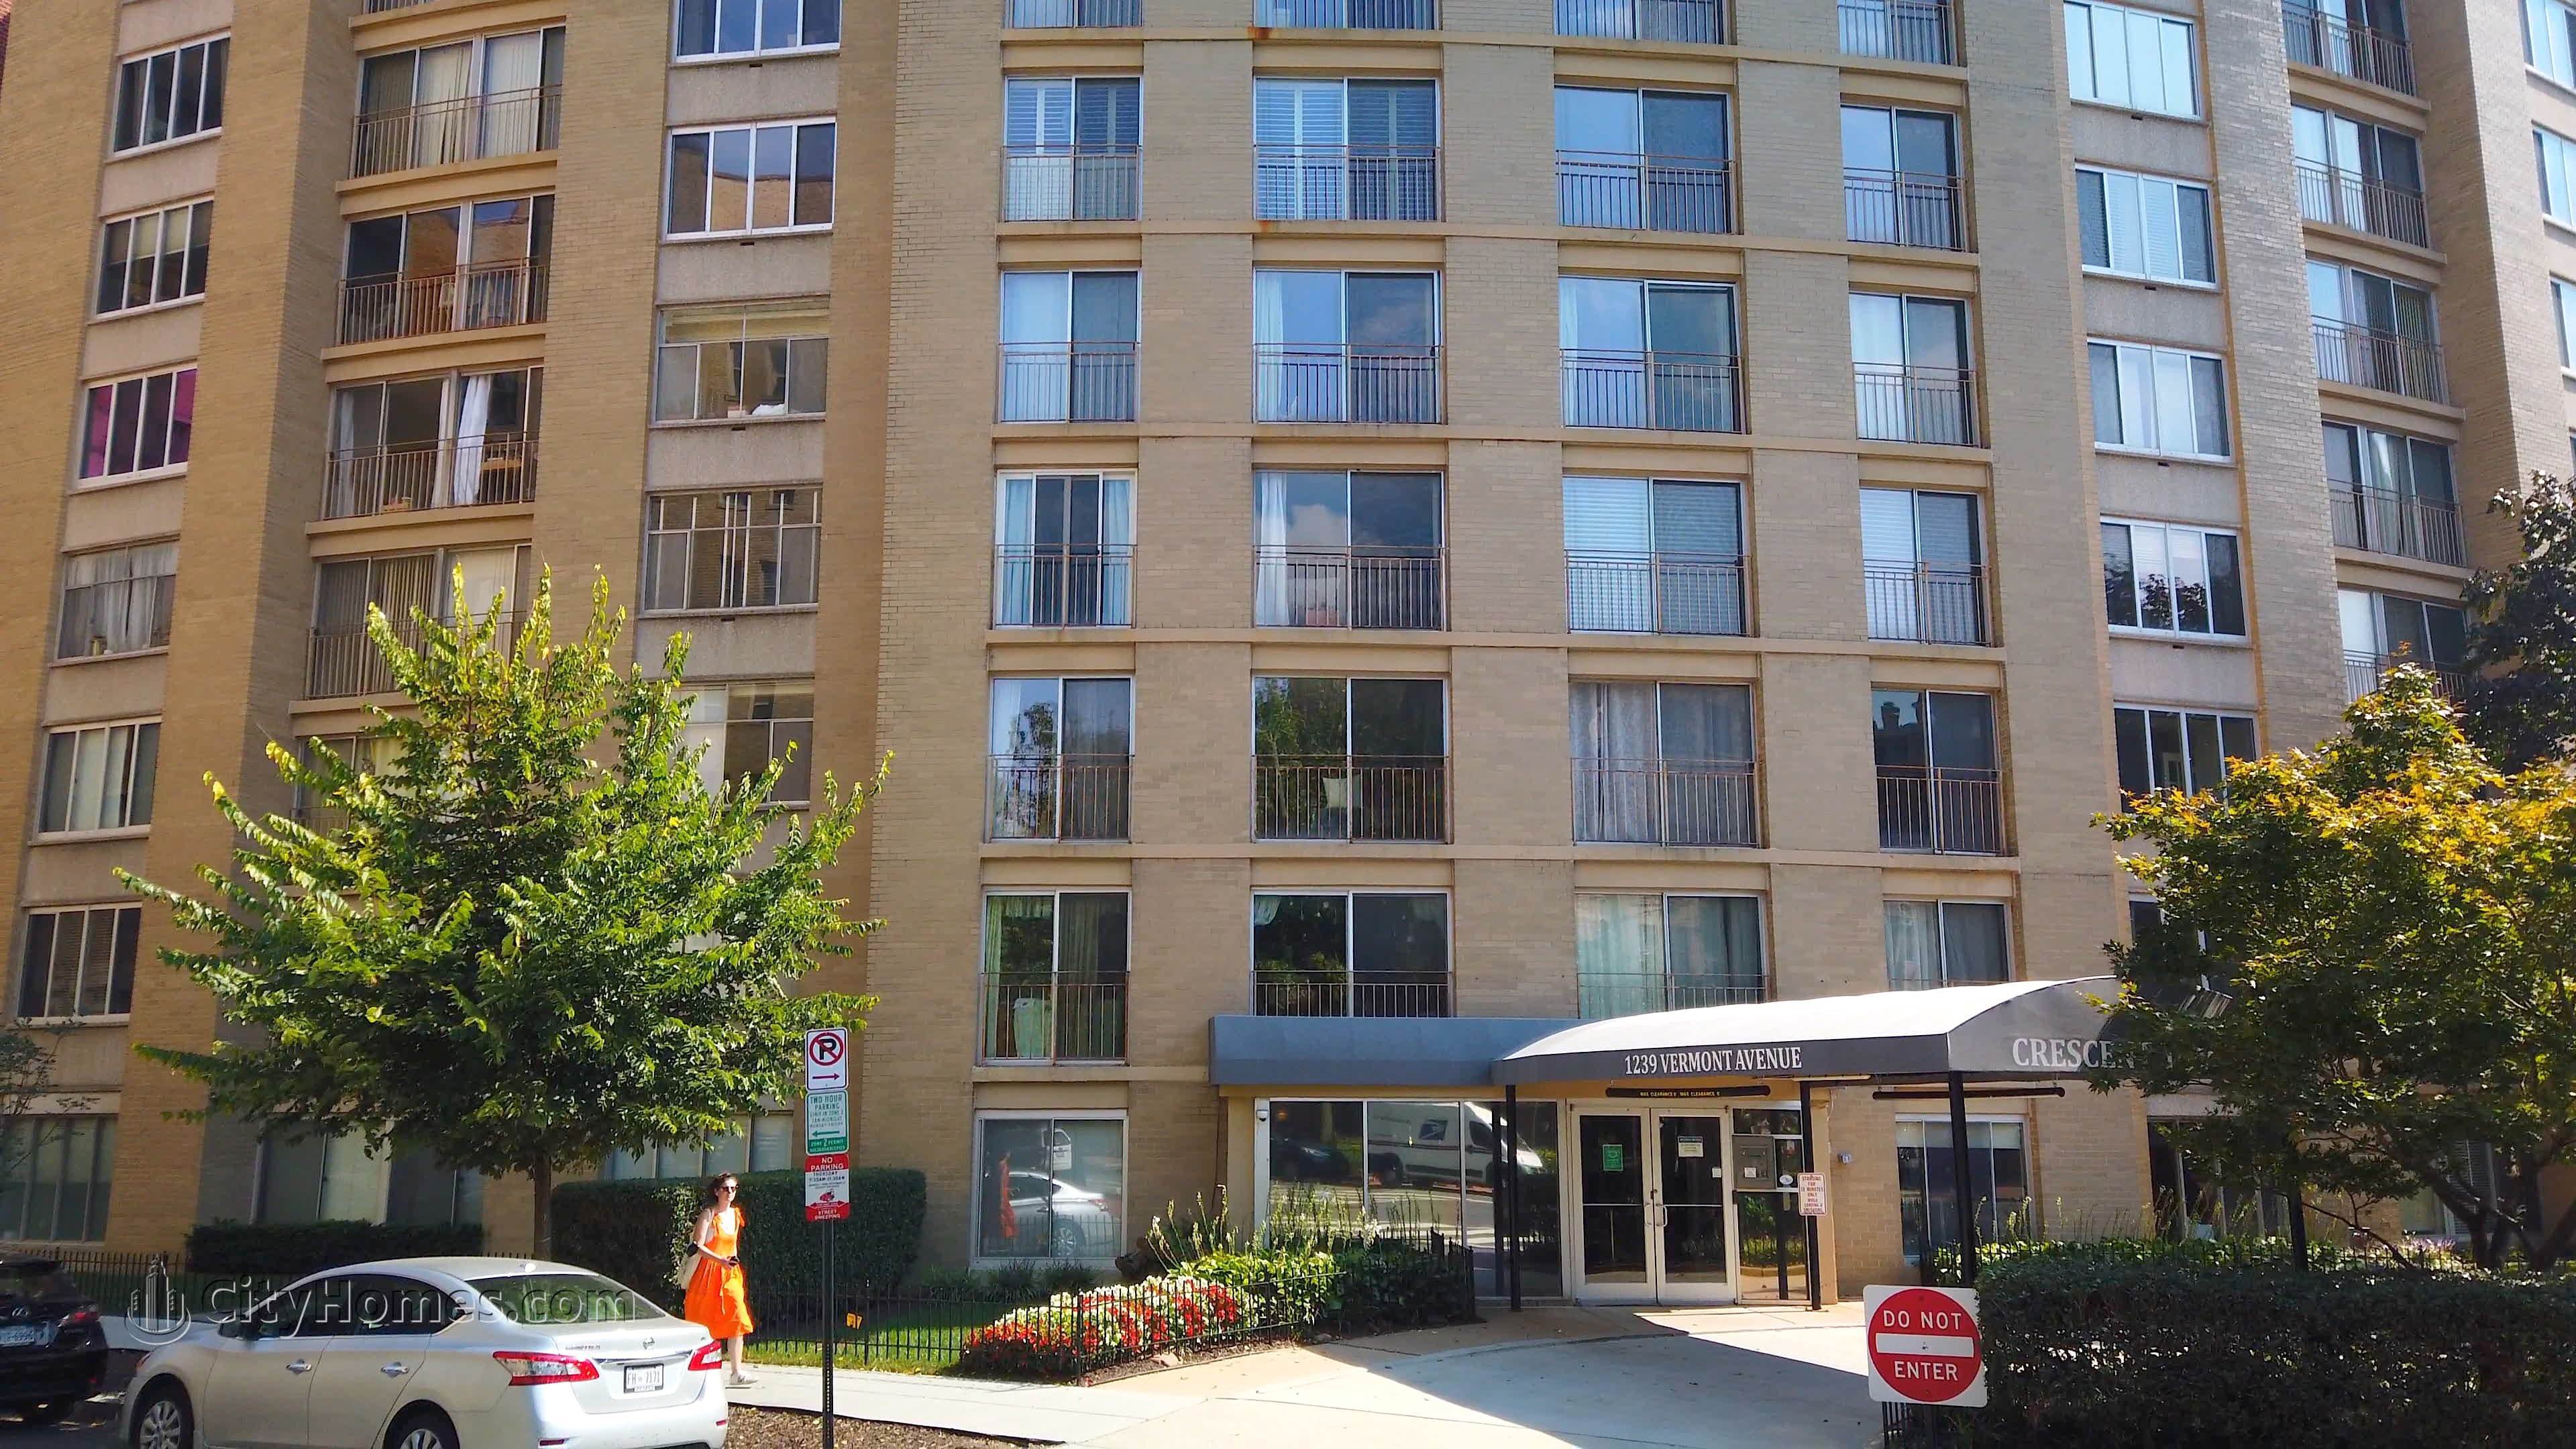 2. Crescent Tower xây dựng tại 1239 Vermont Ave NW, Logan Circle, Washington, DC 20005